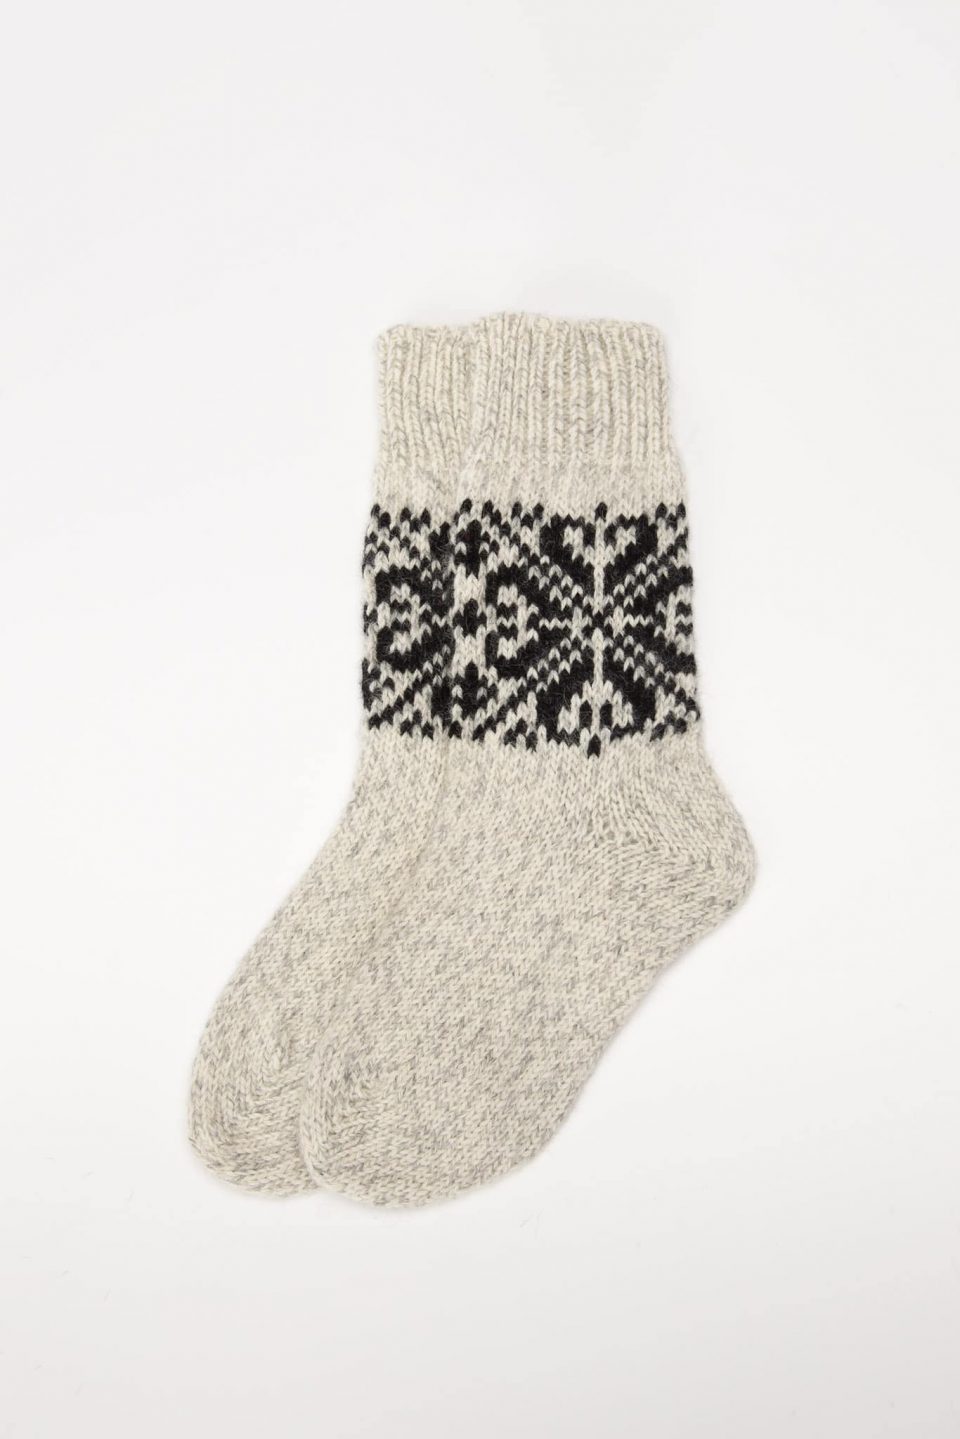 Knitted natural wool socks